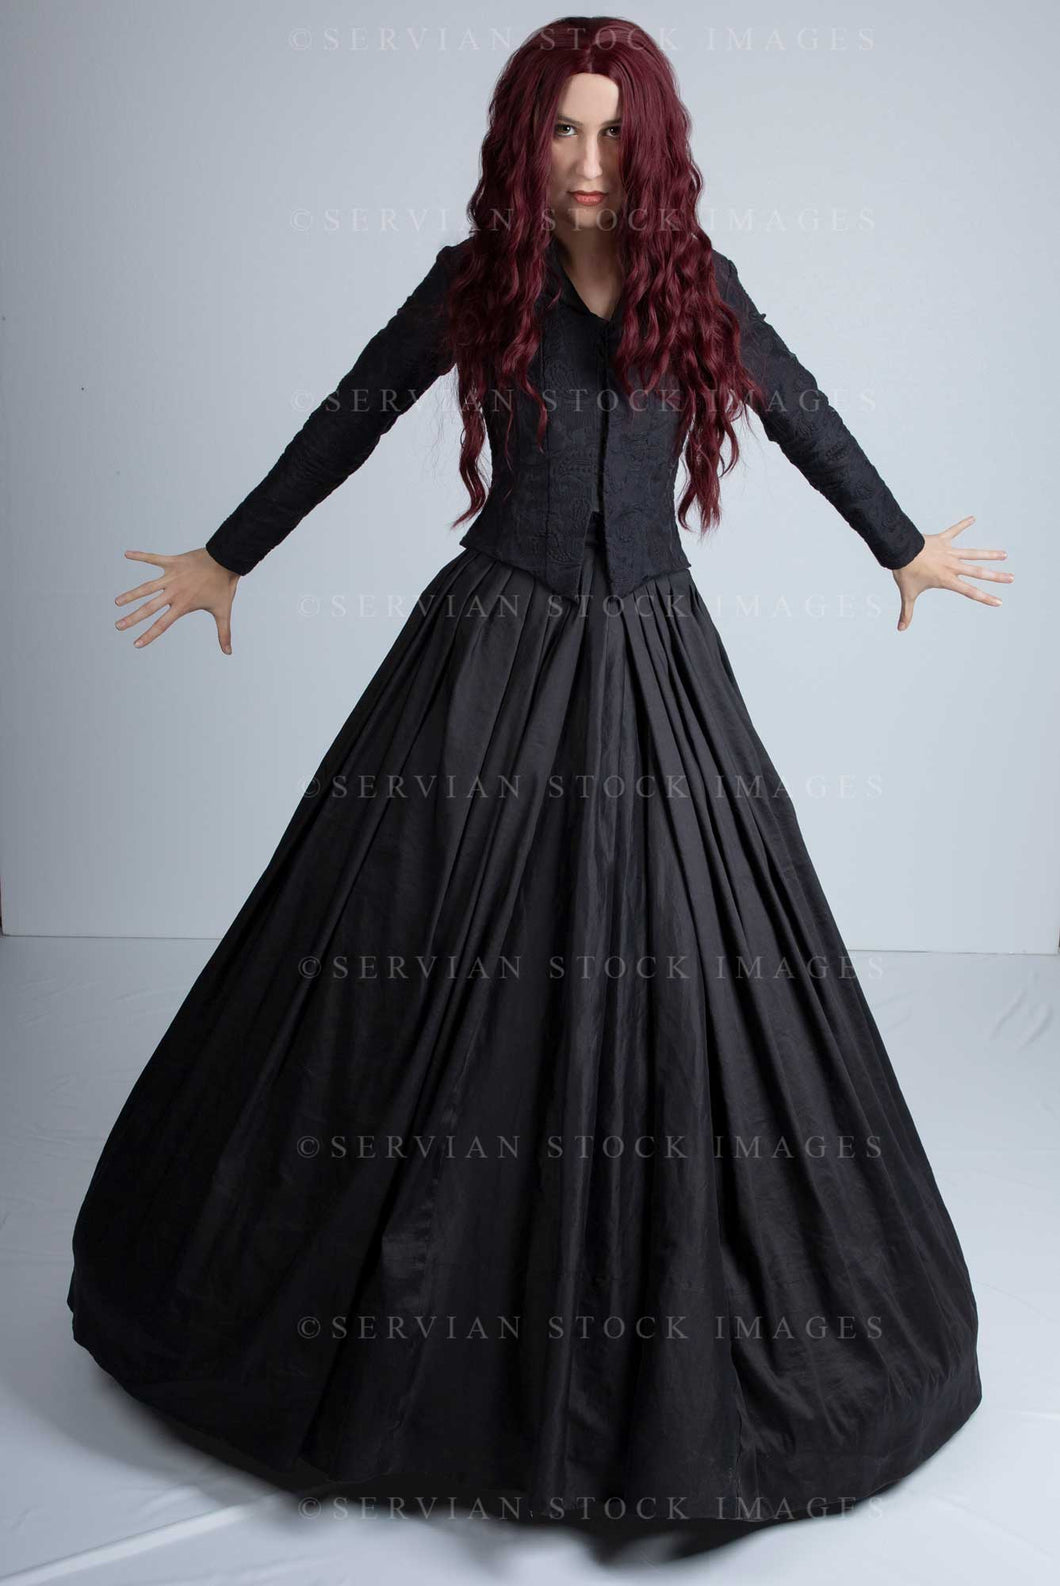 Victorian woman with long red hair wearing a black bodice and skirt and standing in a dramatic pose. She could also be a witch. (Amalia 0813)